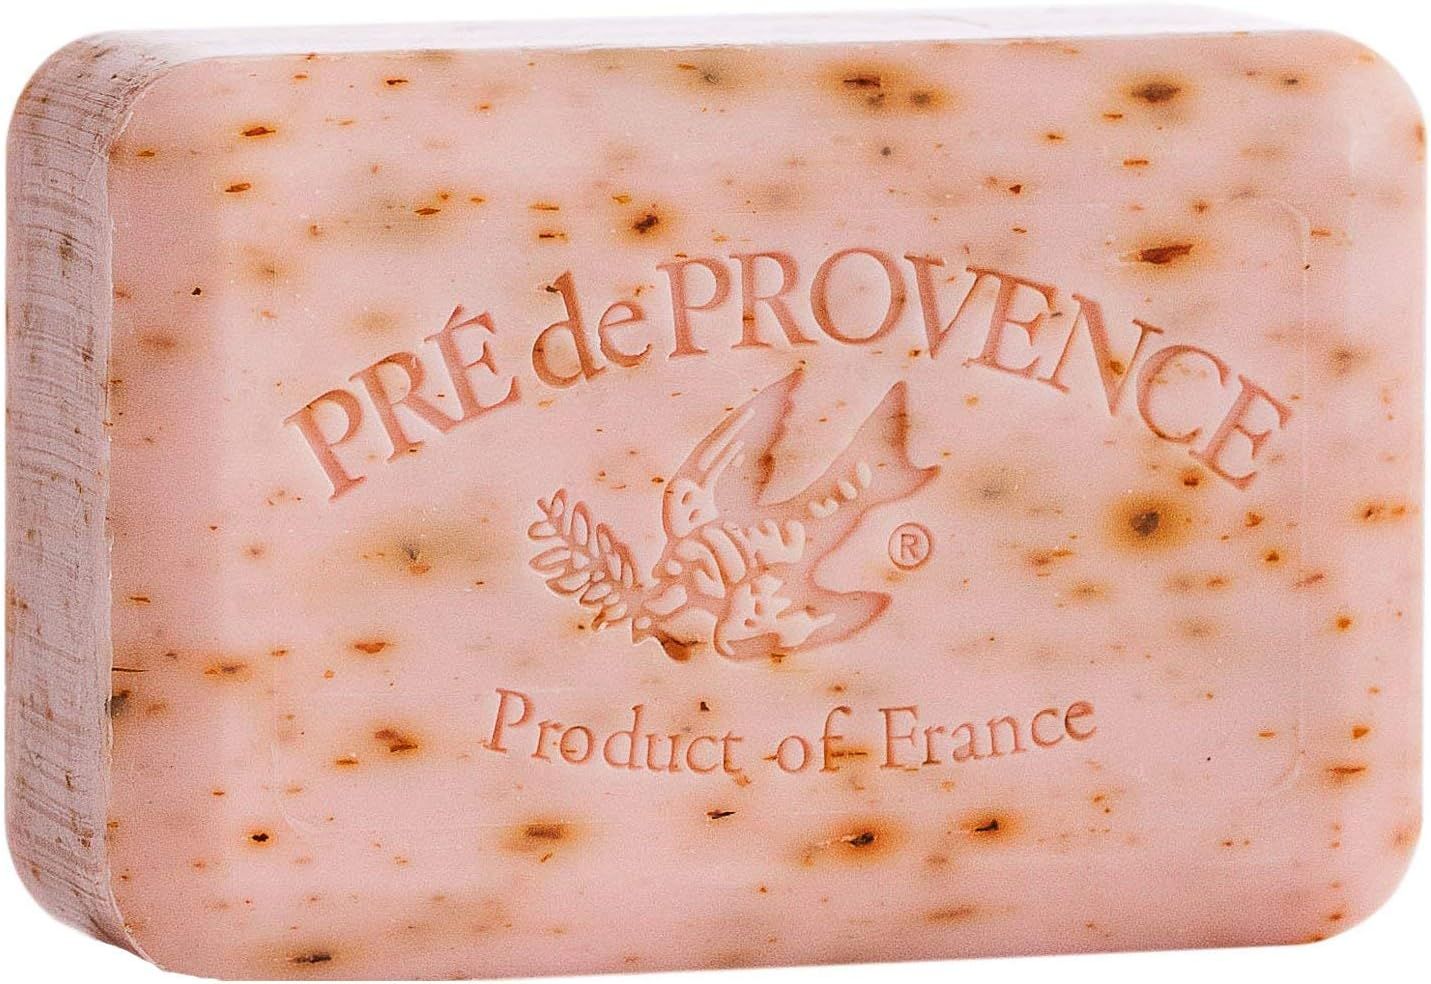 Pre de Provence Artisanal Soap Bar, Enriched with Organic Shea Butter, Natural French Skincare, Q... | Amazon (US)